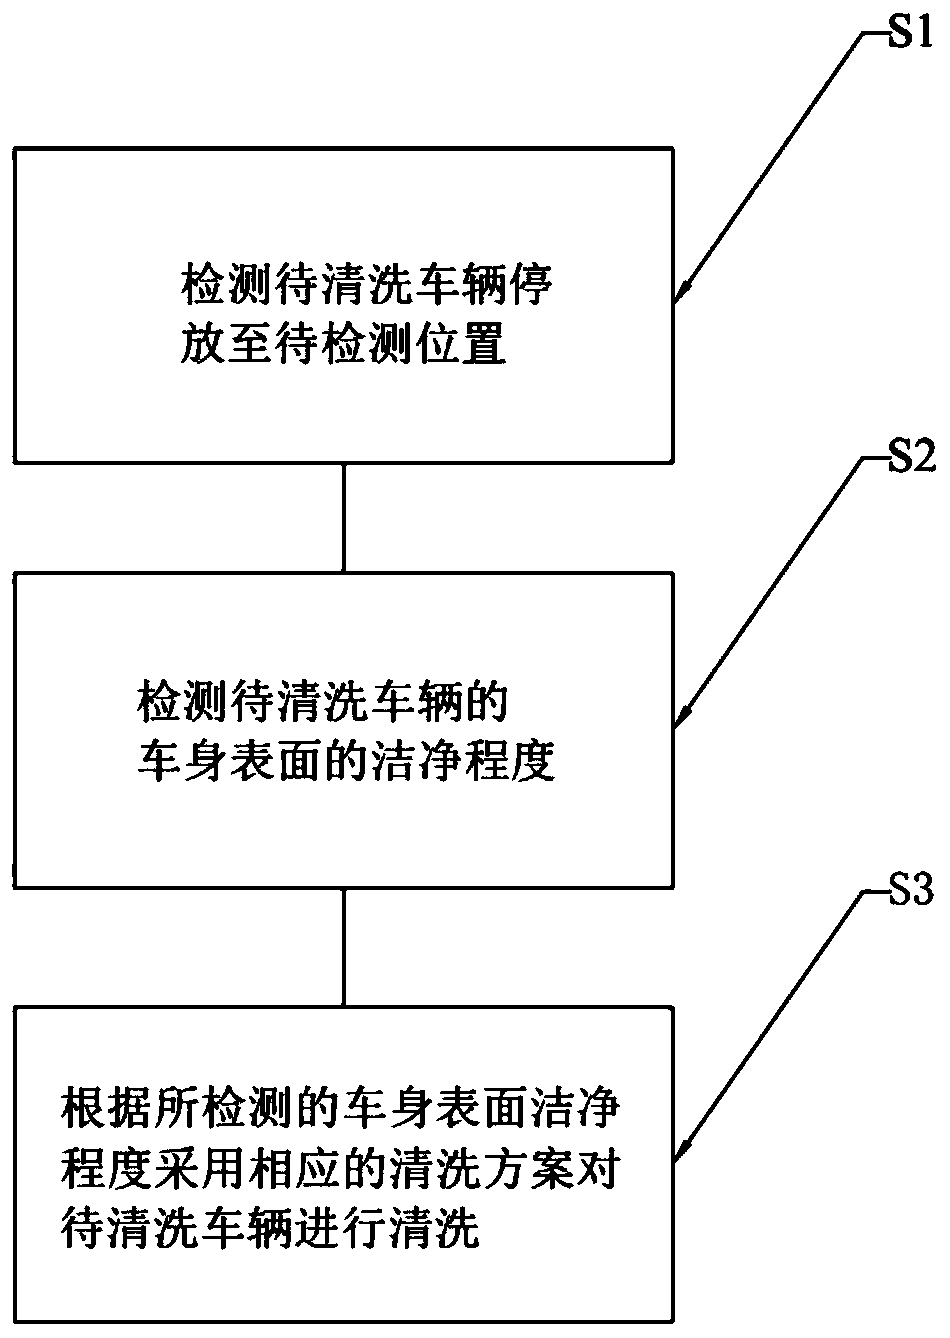 Vehicle cleaning method and system based on image recognition